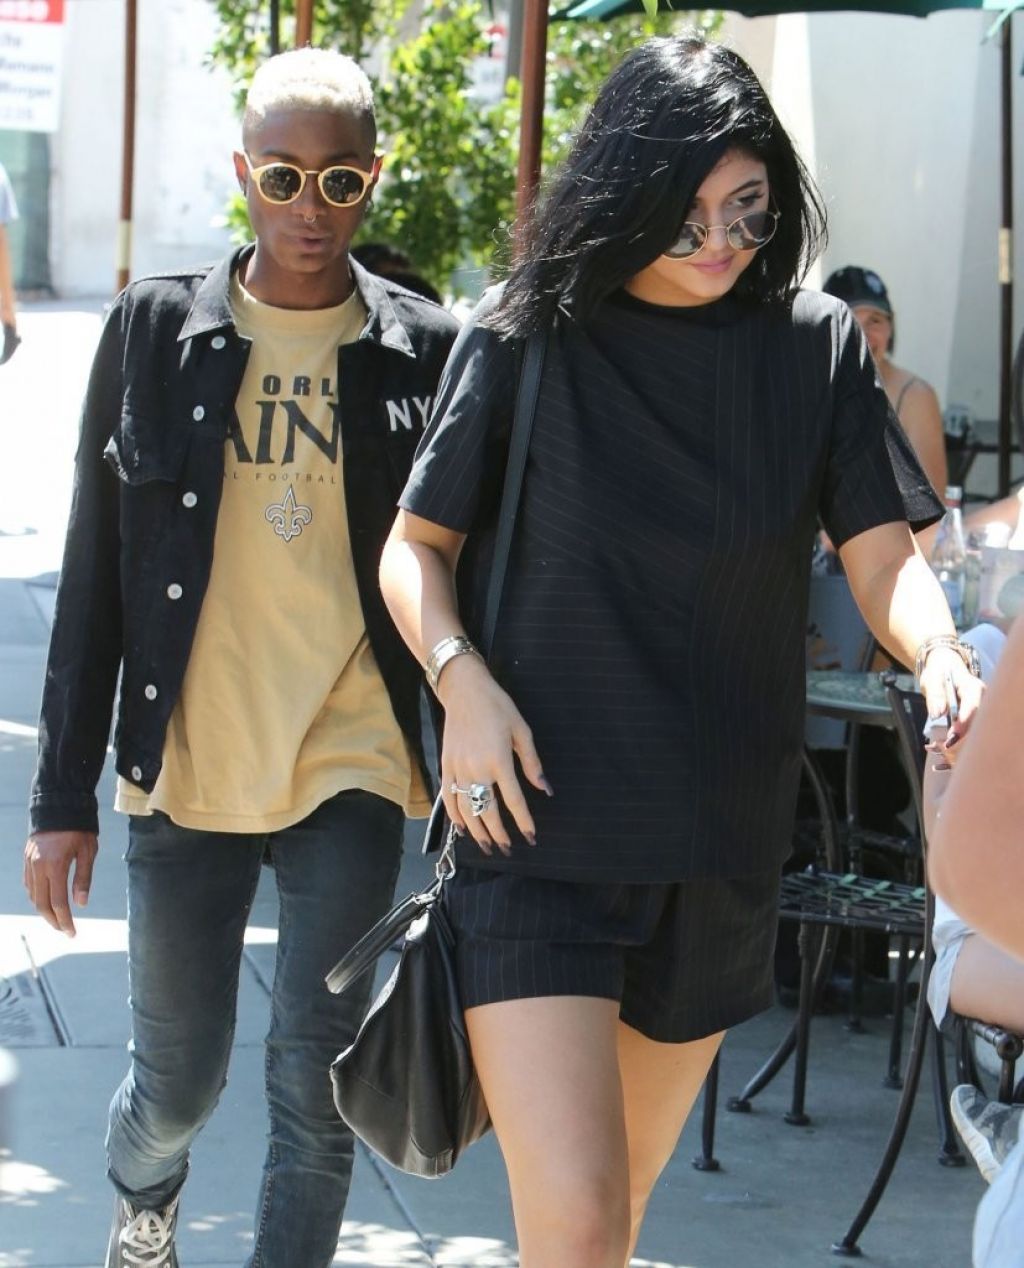 Kylie Jenner Los Angeles July 20, 2014 – Star Style